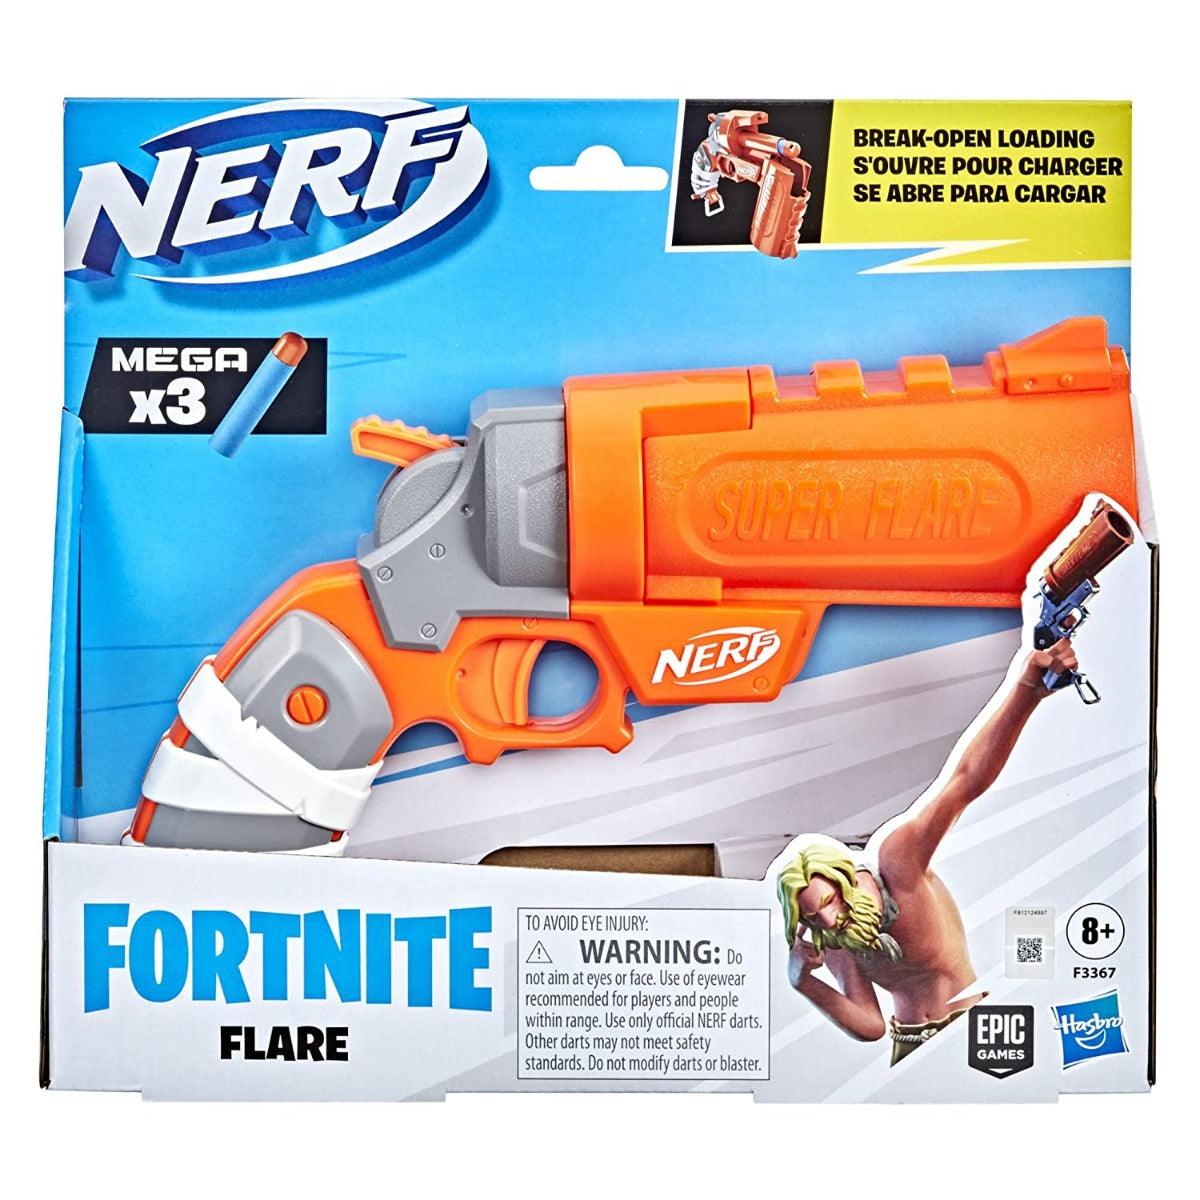 Hasbro reveals new Nerf Fortnite blasters for 2020 - GEEKSPIN